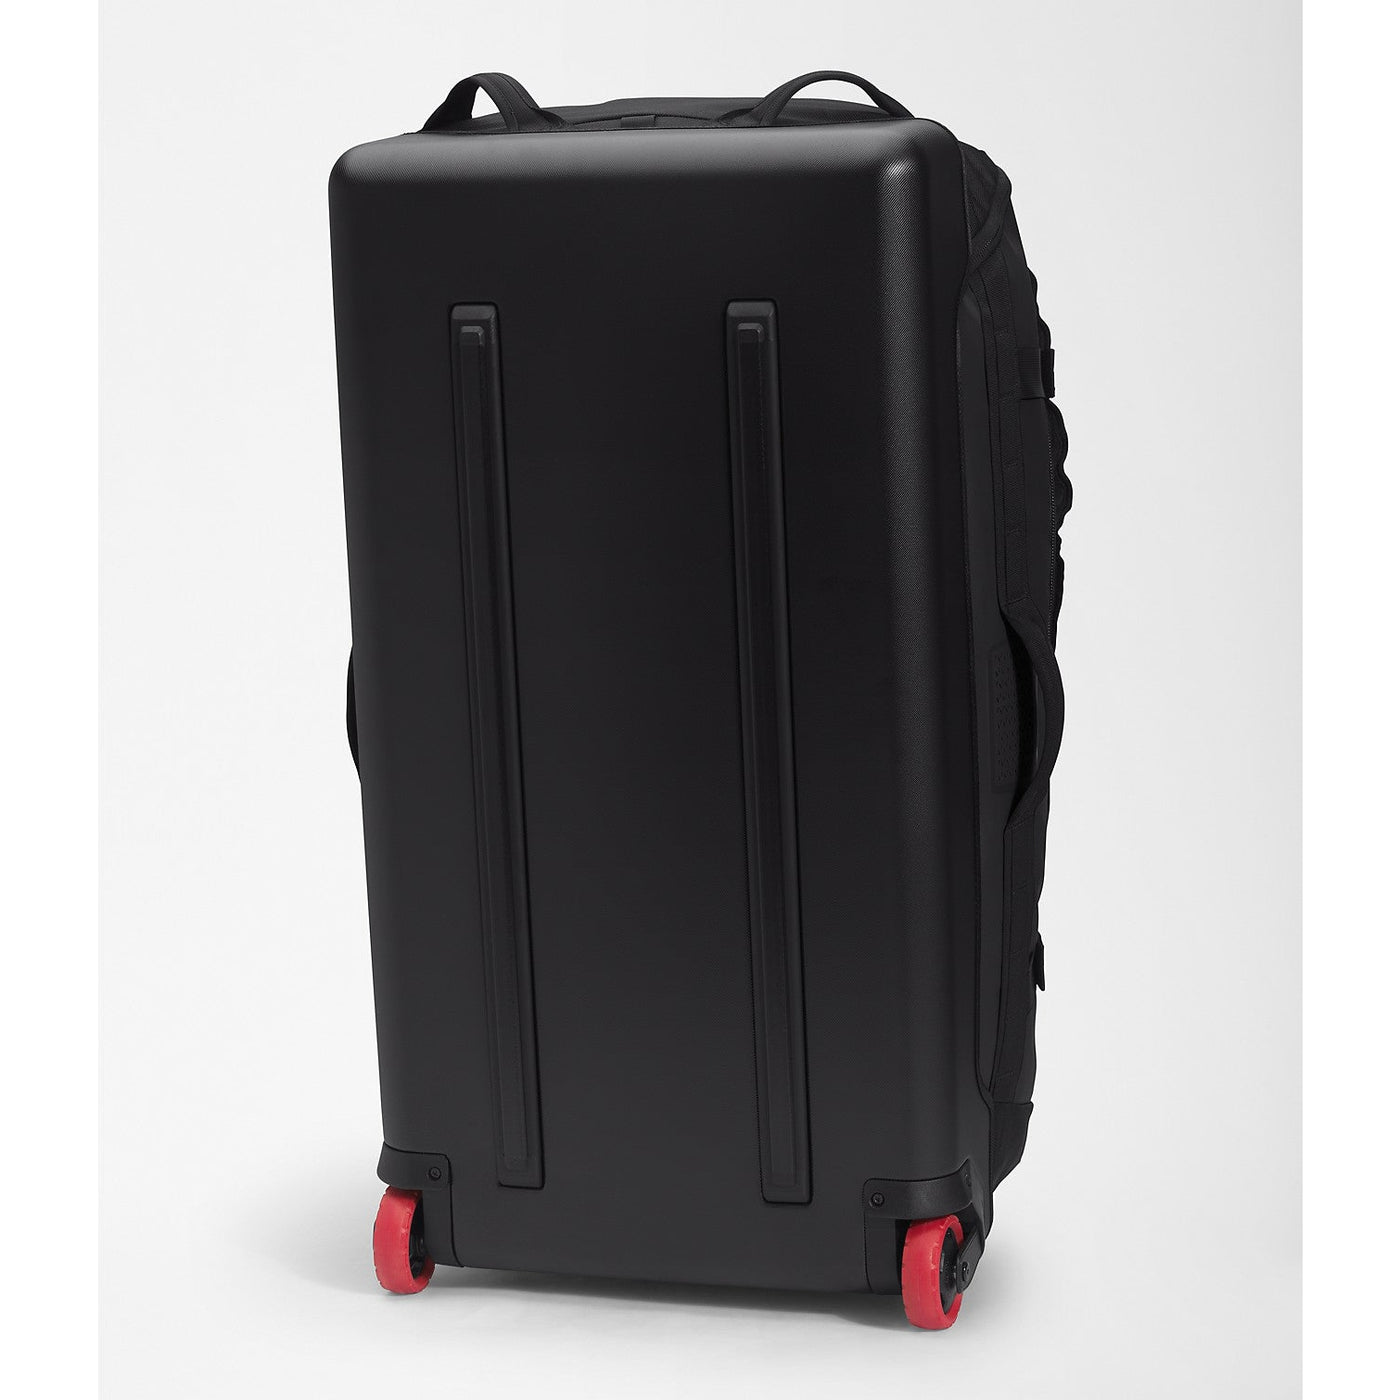 The North Face Rolling Thunder 36"-Luggage-TNF BLACK-Kevin's Fine Outdoor Gear & Apparel